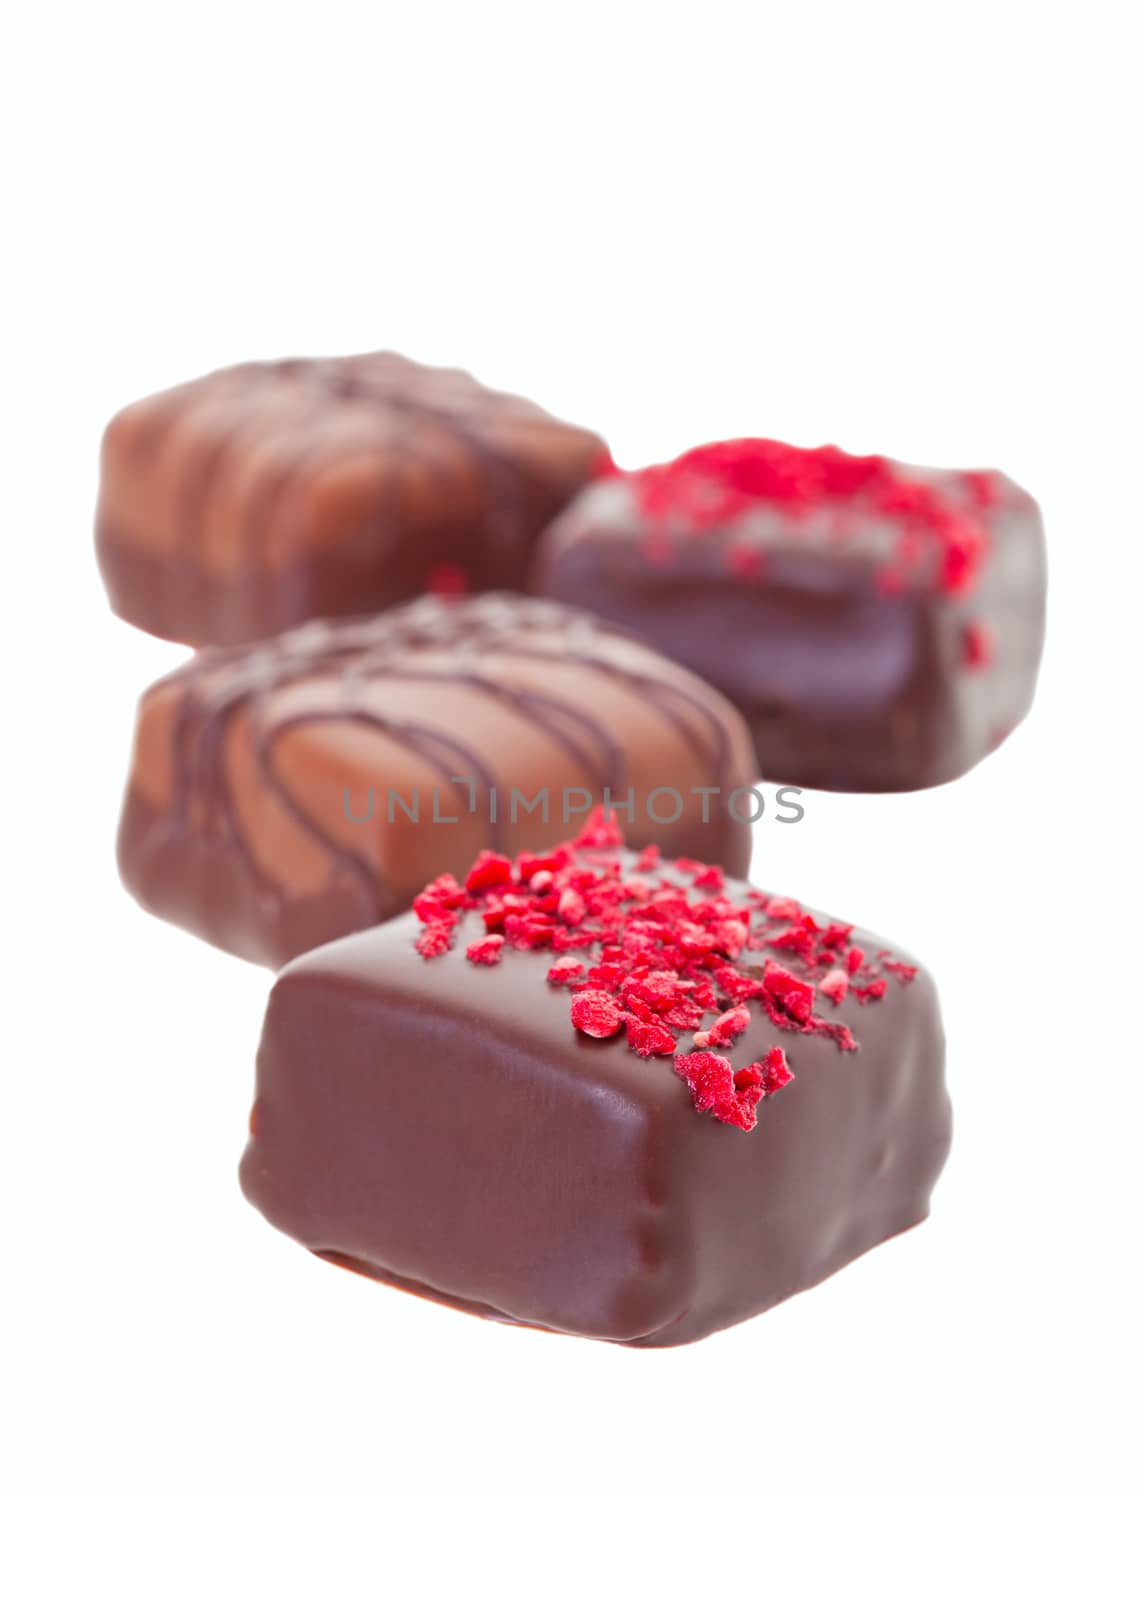 An assortment of fine chocolates on a white background.  Shallow depth of field.